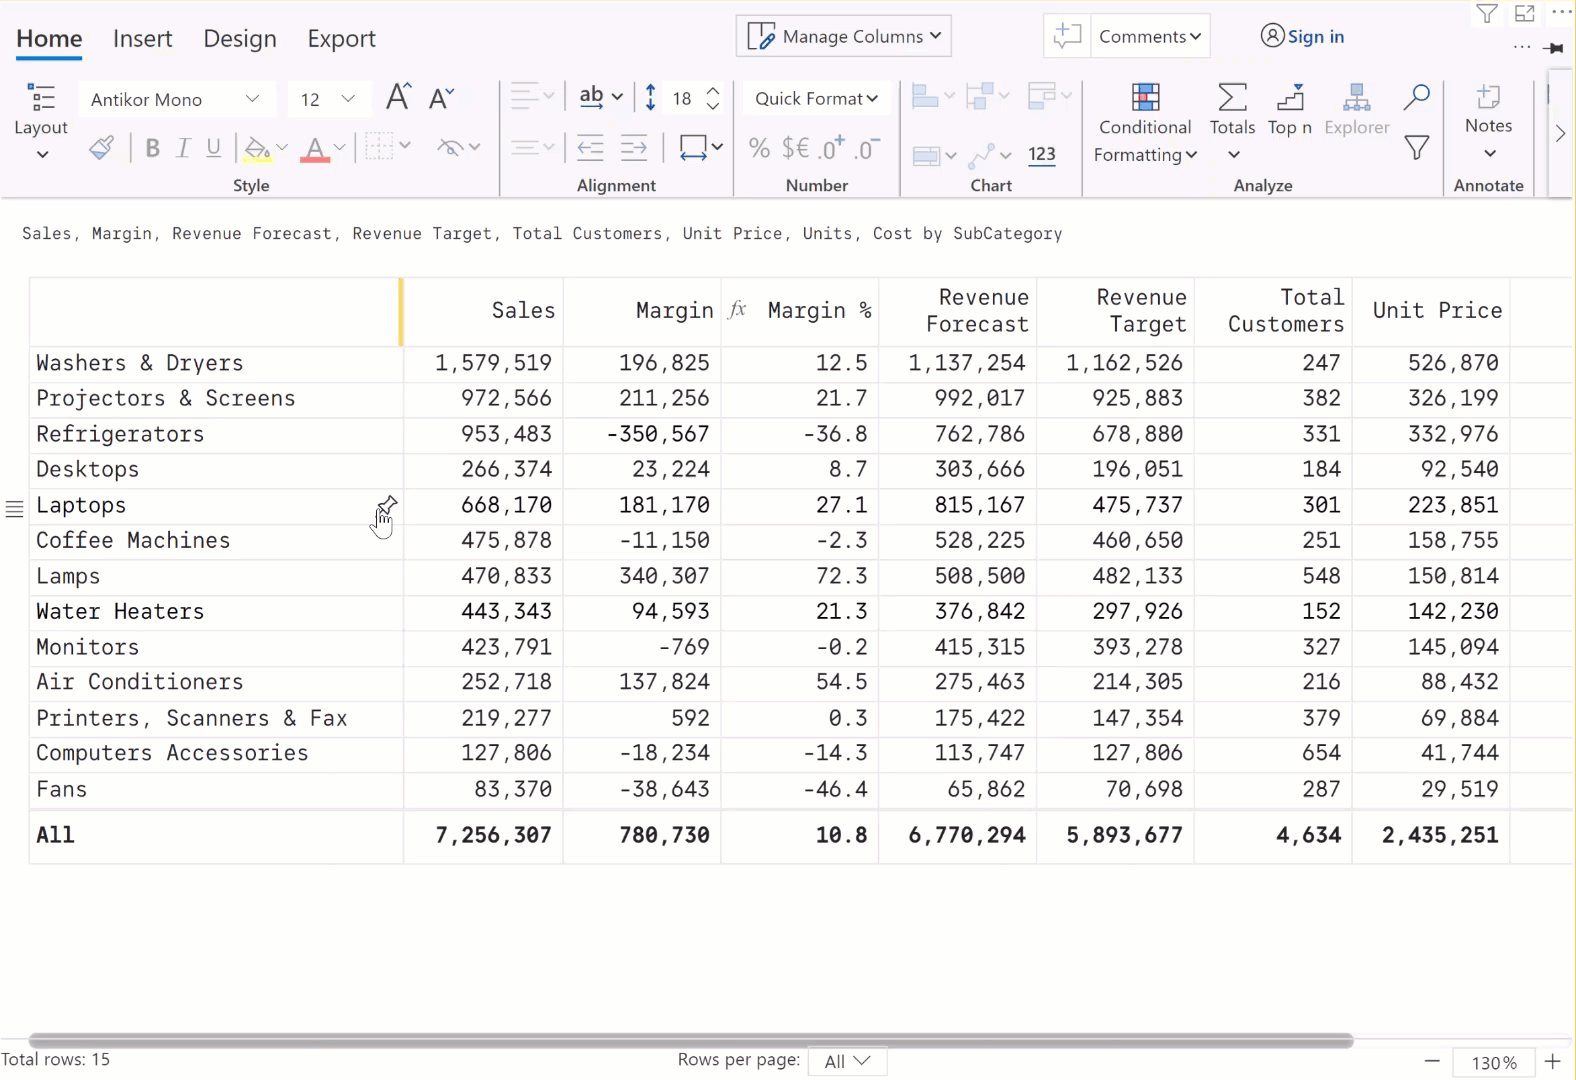 Pin or freeze rows and columns